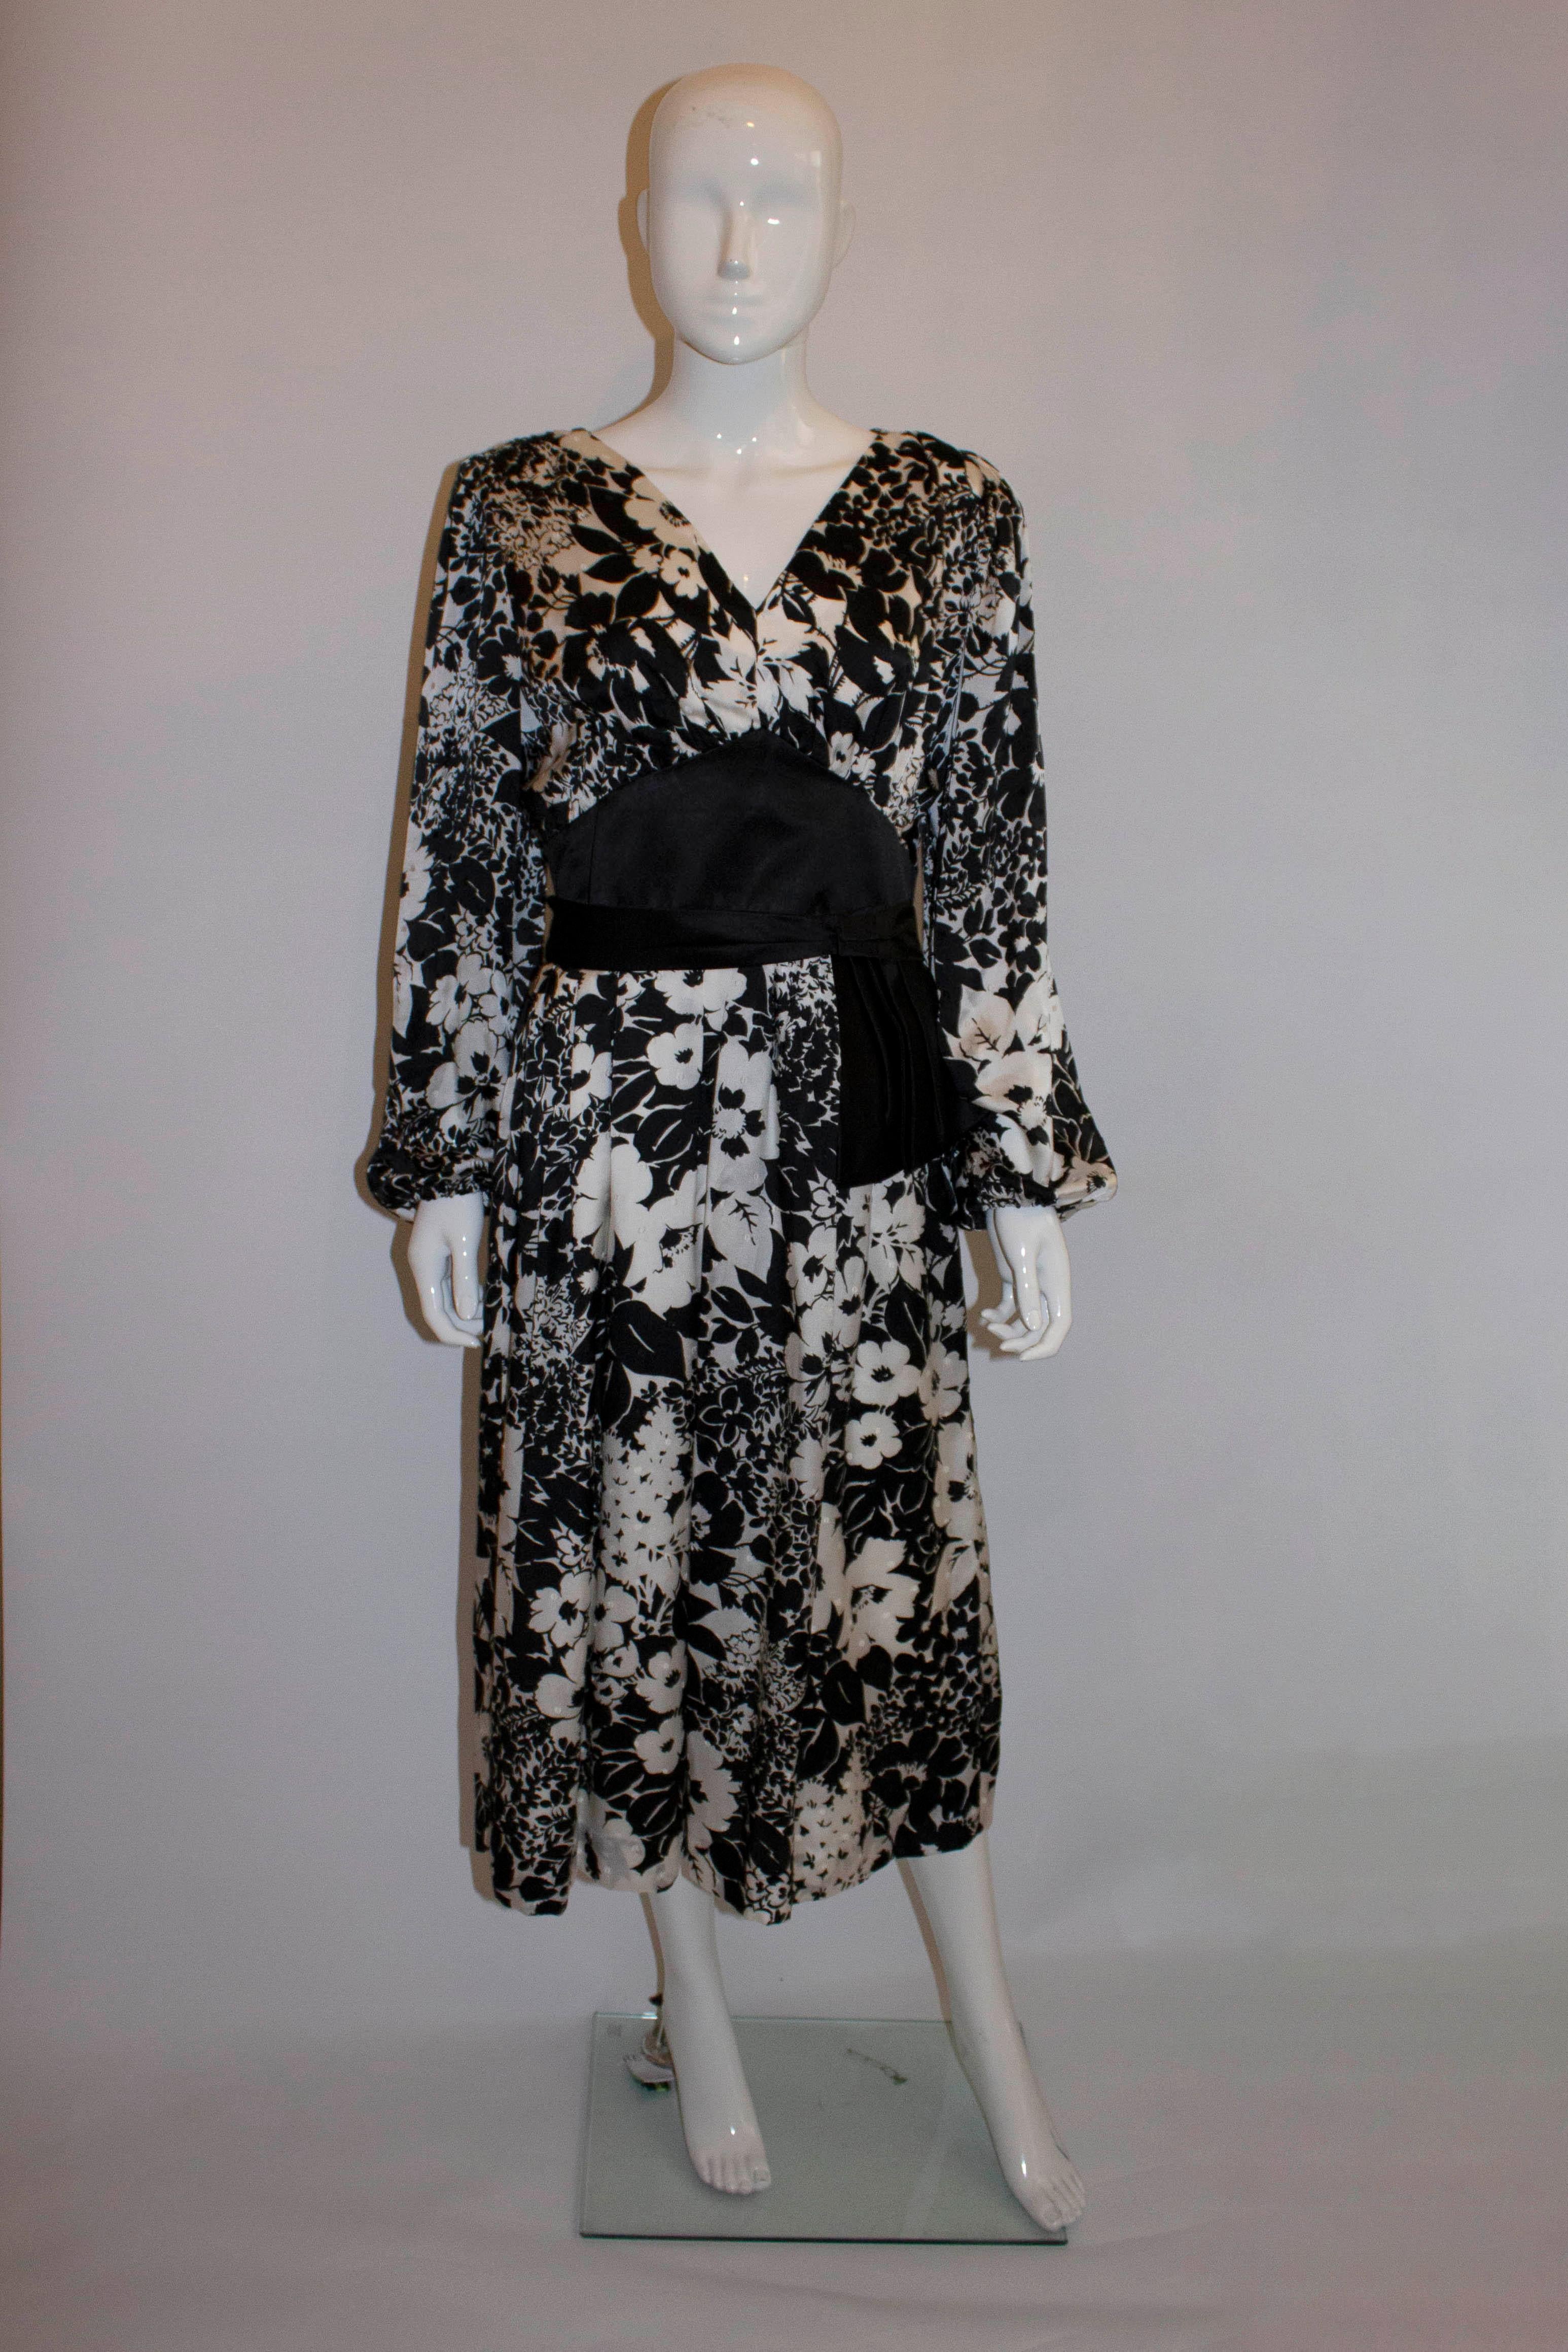 A stunning vintage silk dress by Donald Campbell. In a pretty black and white print with texture, the dress has a v neckline with sash detail, gathering at the shoulders , elasticated wrists and a central back zip.
Size 12  Measurements  Bust up to